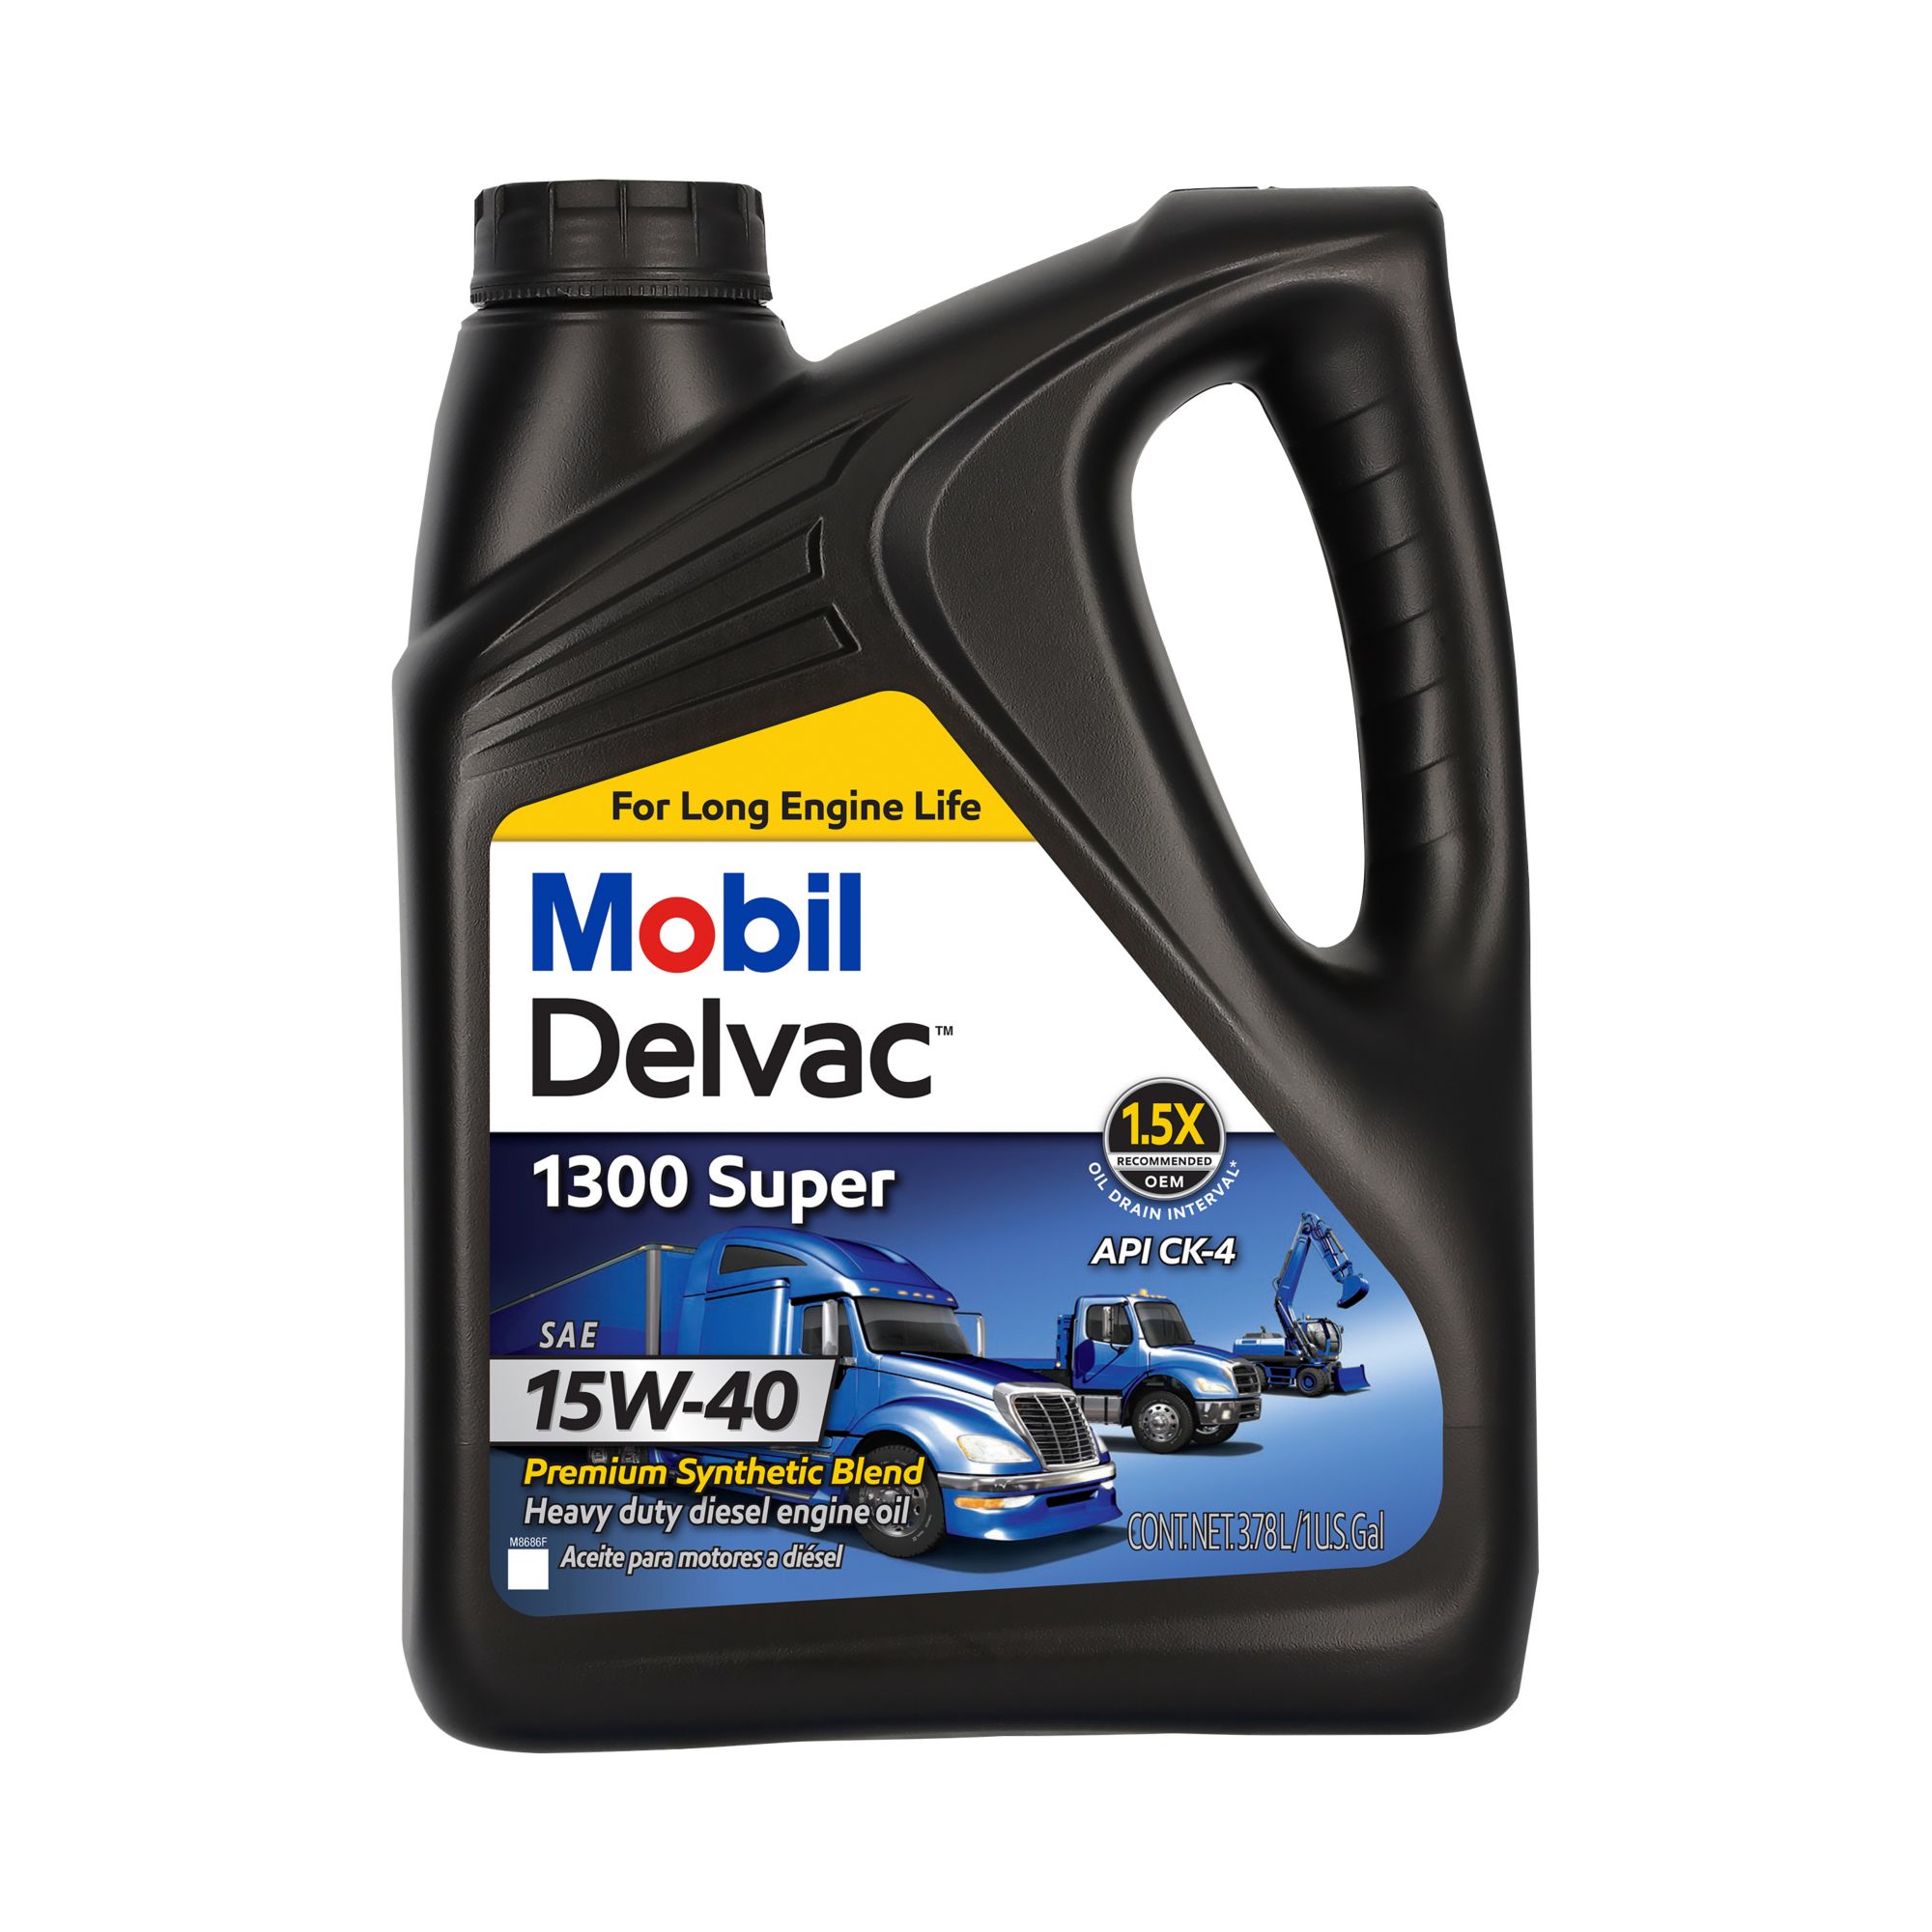 Mobil Delvac 10w 40 Diesel. Mobil 10w 40 Synthetic engine Oil. Мобил Делвак 10w 50. Oil Motor SAE 15w40.